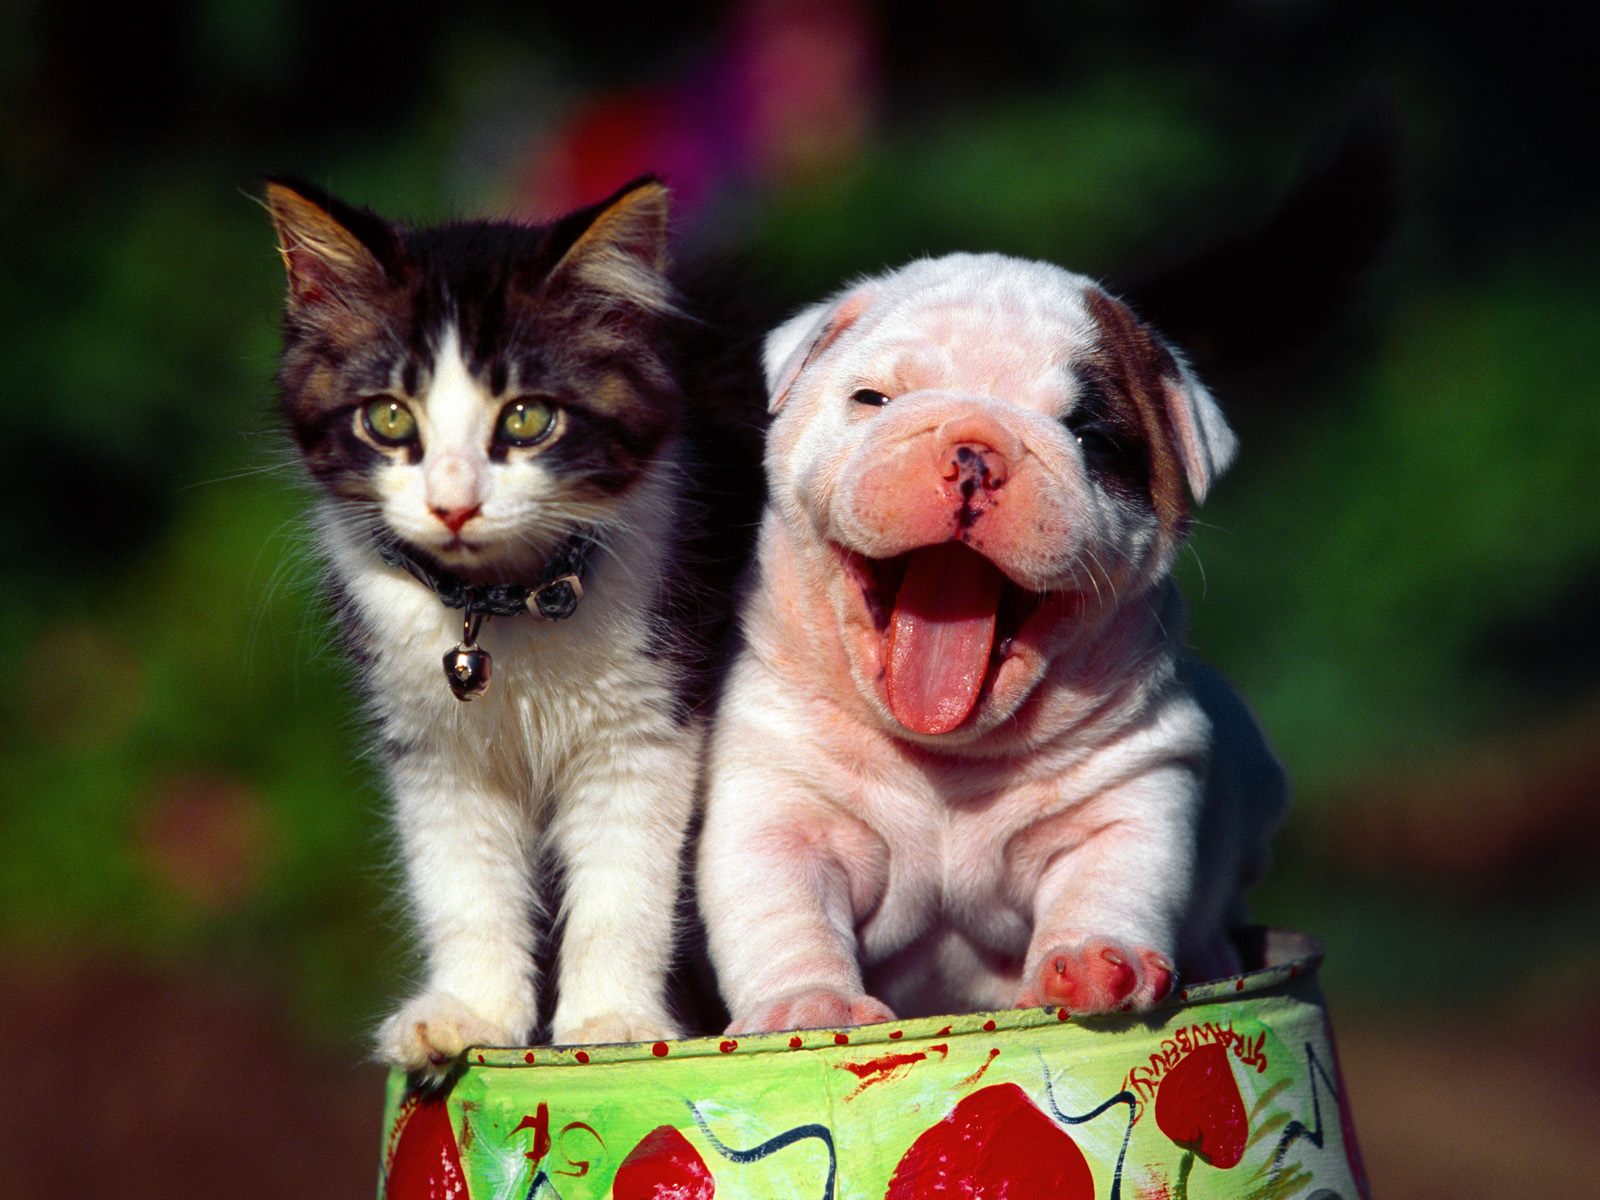 Animal Dogs and Cats Wallpaper High Quality WallpapersWallpaper